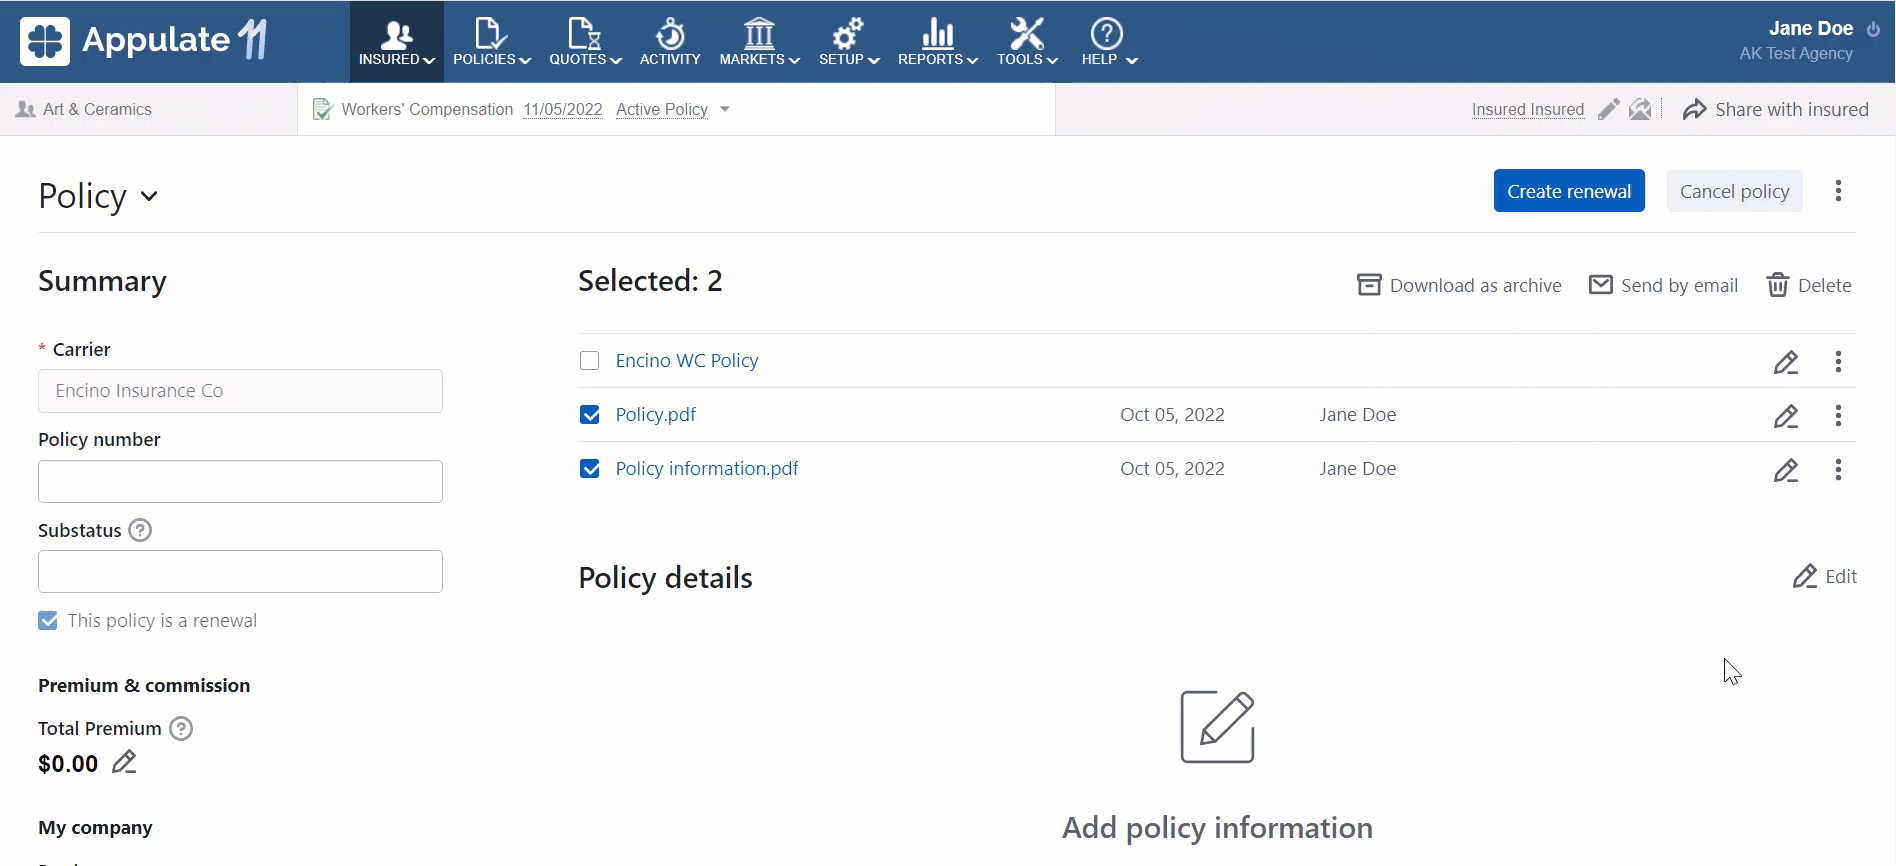 editing policy details